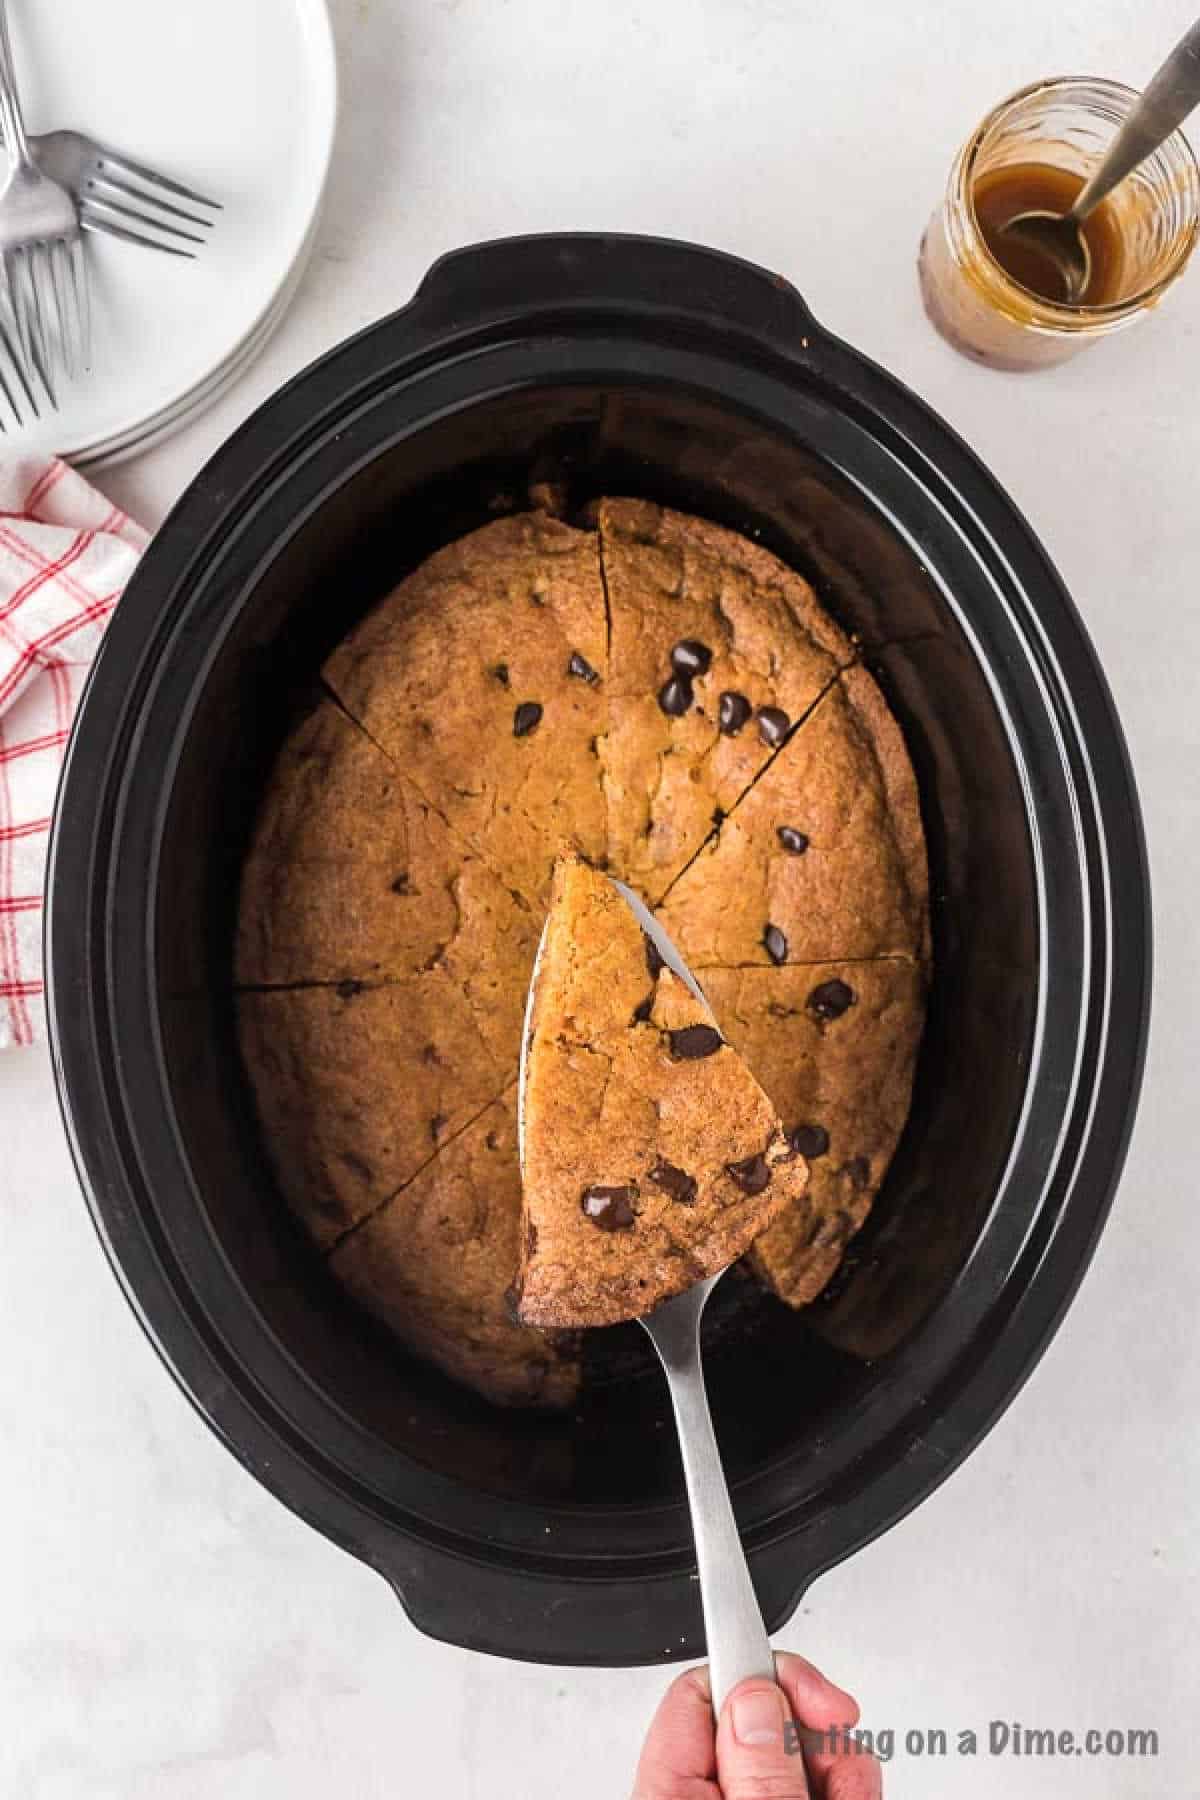 Crock pot chocolate chip cookie recipe is warm and gooey with lots of delicious chocolate. Serve this with ice cream for a real treat. 